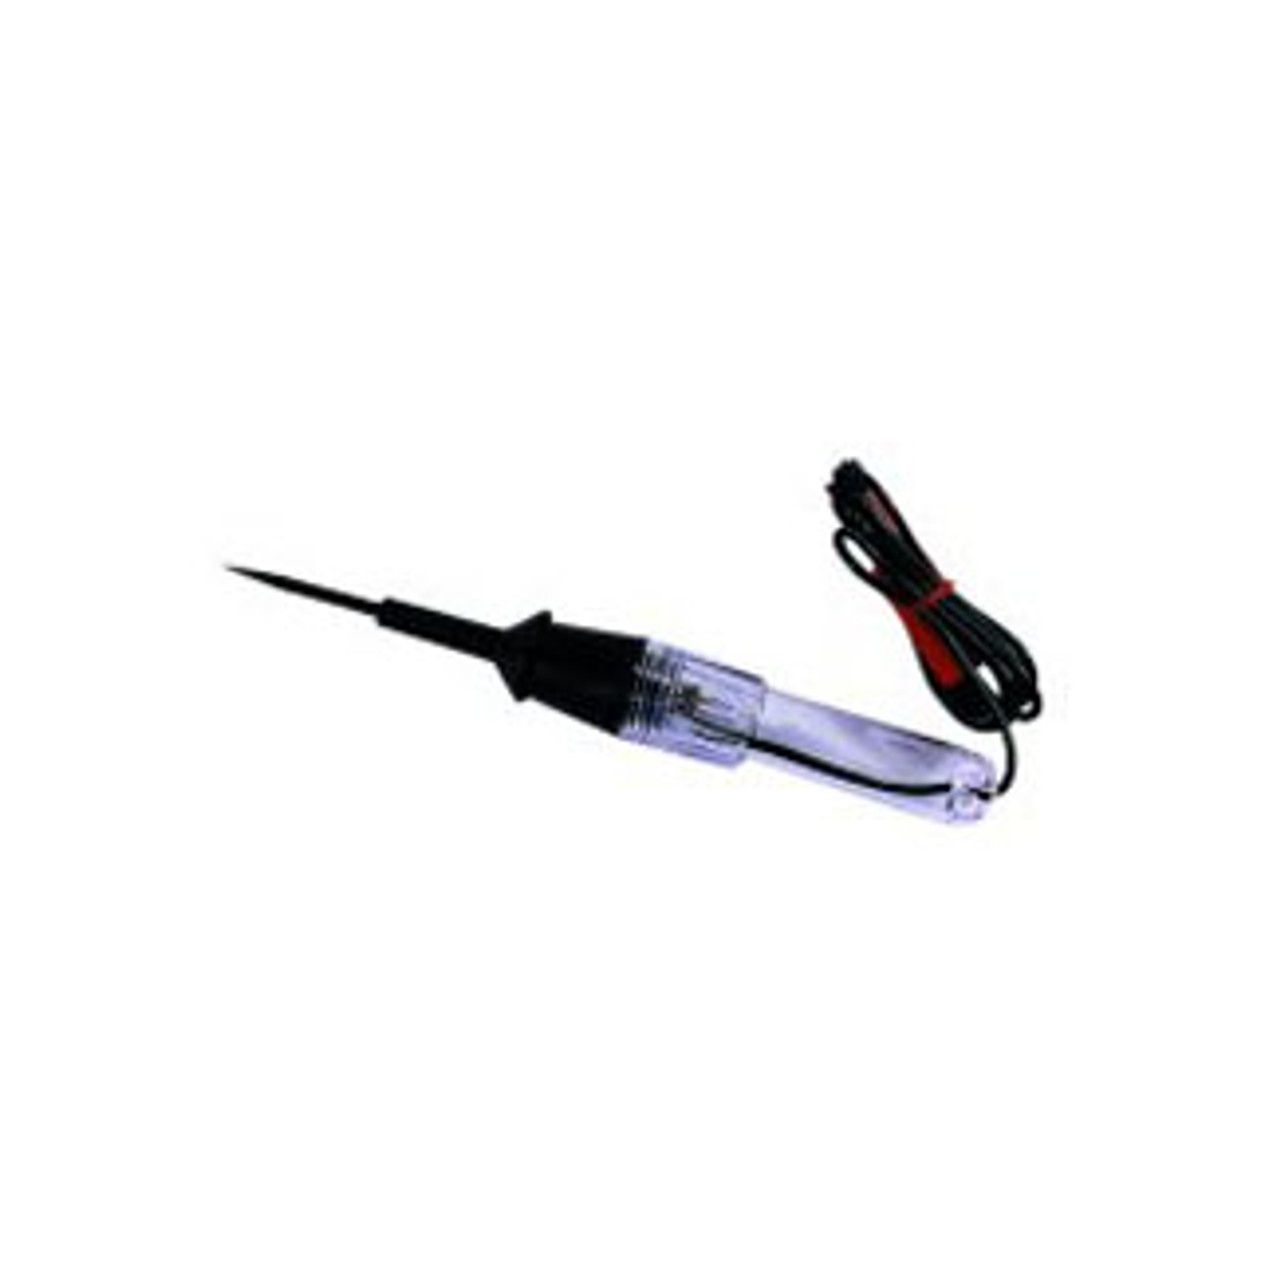 12 Volt Circuit Tester with 48" Cord